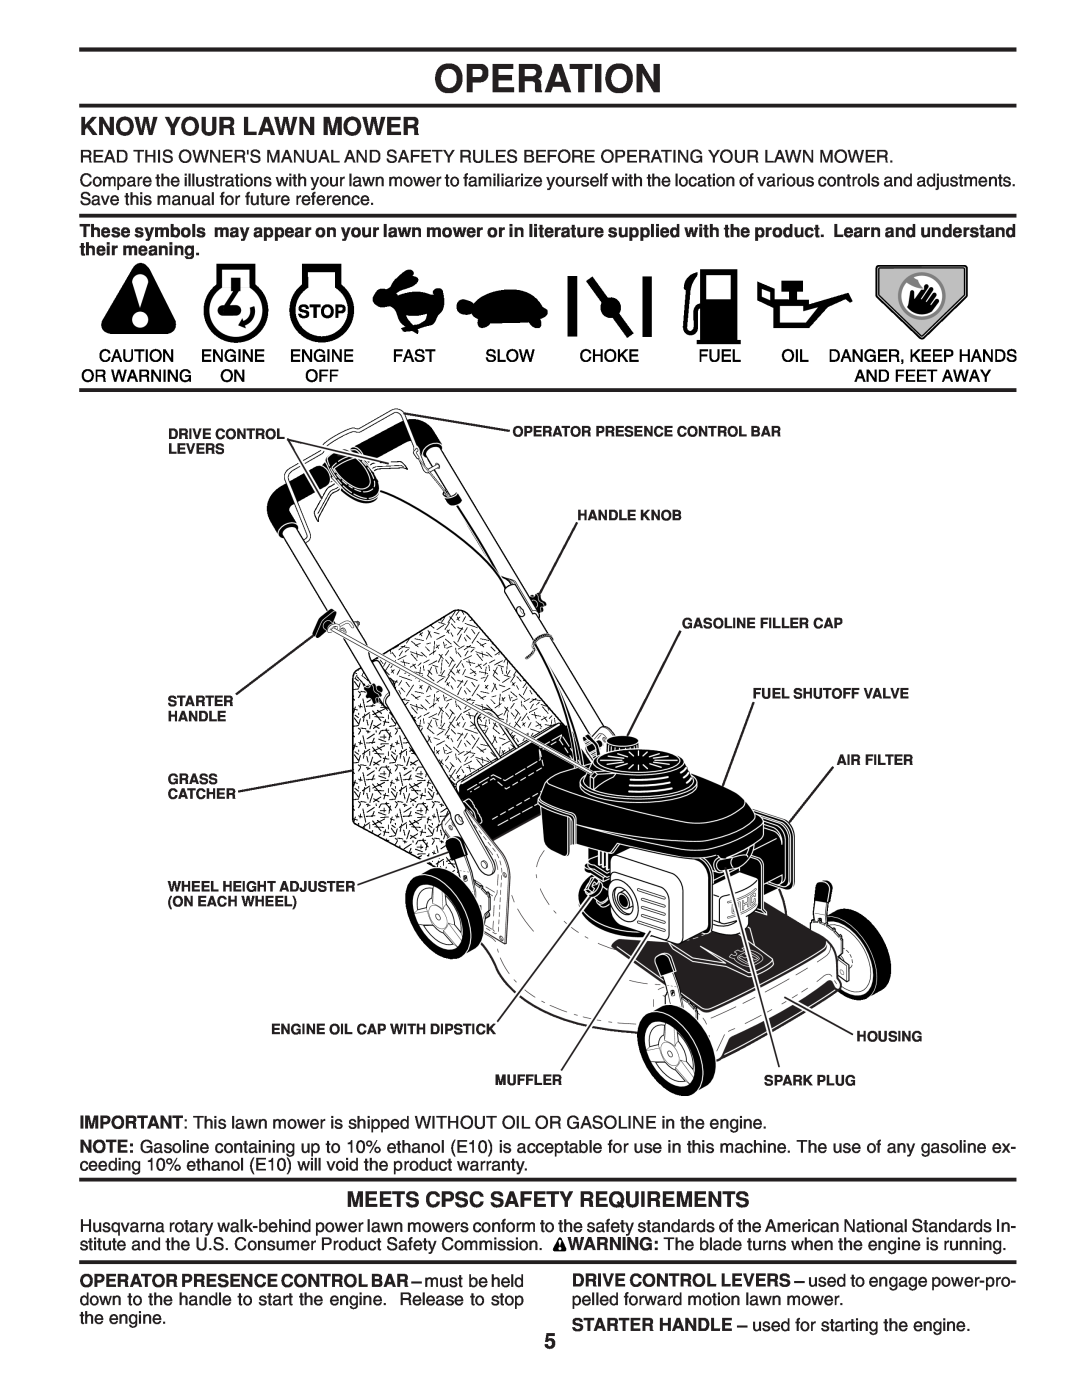 Husqvarna 961430097 manual Operation, Know Your Lawn Mower, Meets Cpsc Safety Requirements 